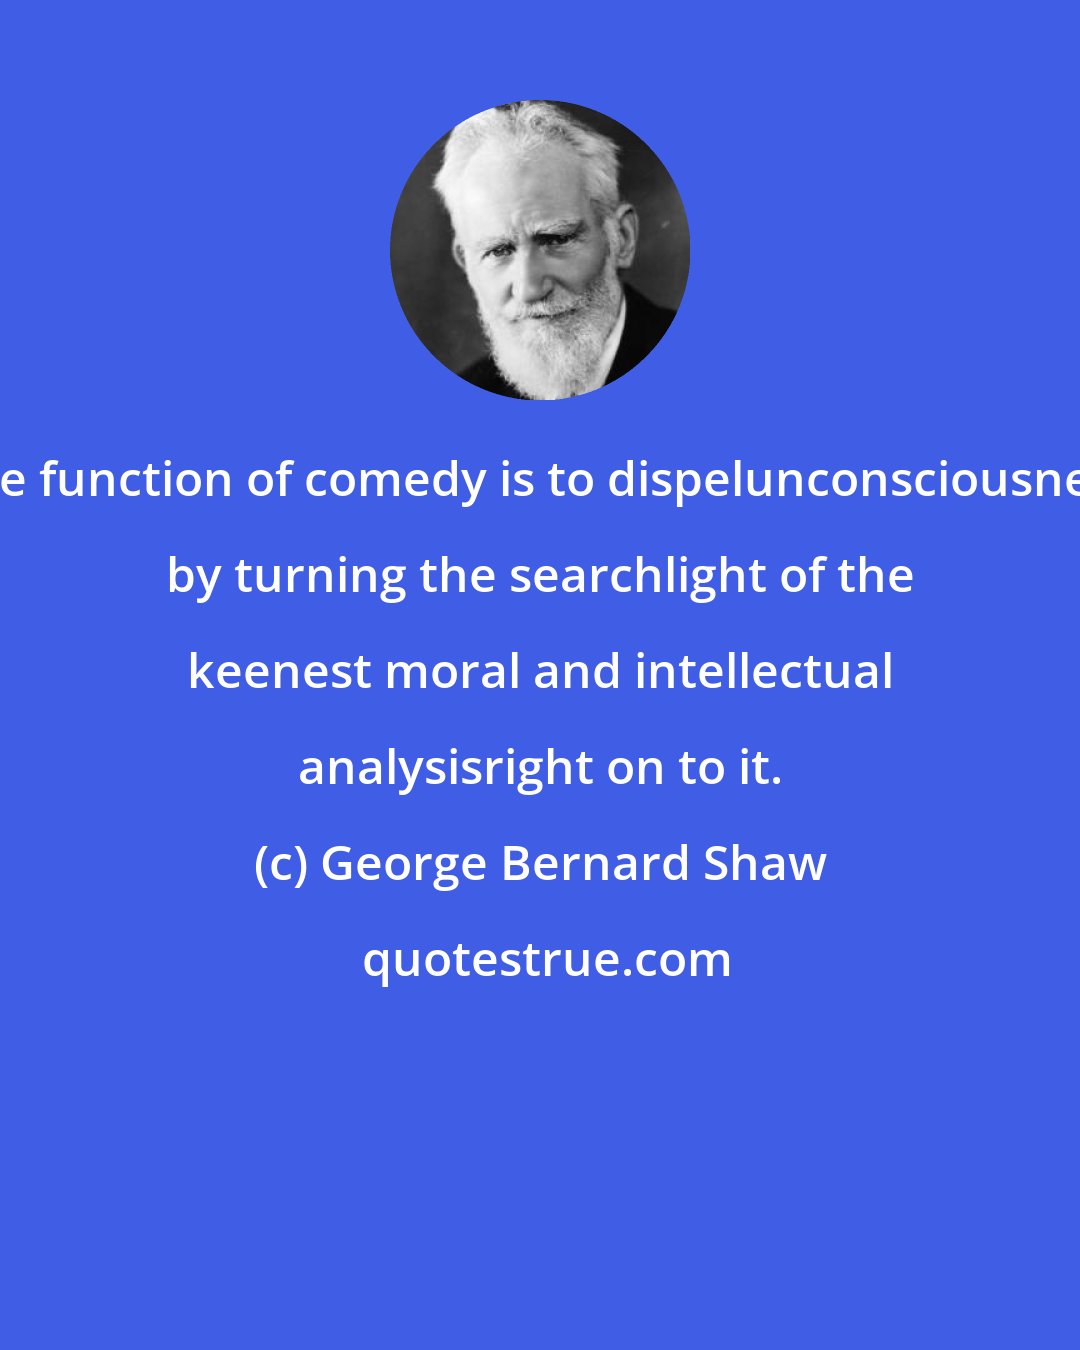 George Bernard Shaw: The function of comedy is to dispelunconsciousness by turning the searchlight of the keenest moral and intellectual analysisright on to it.